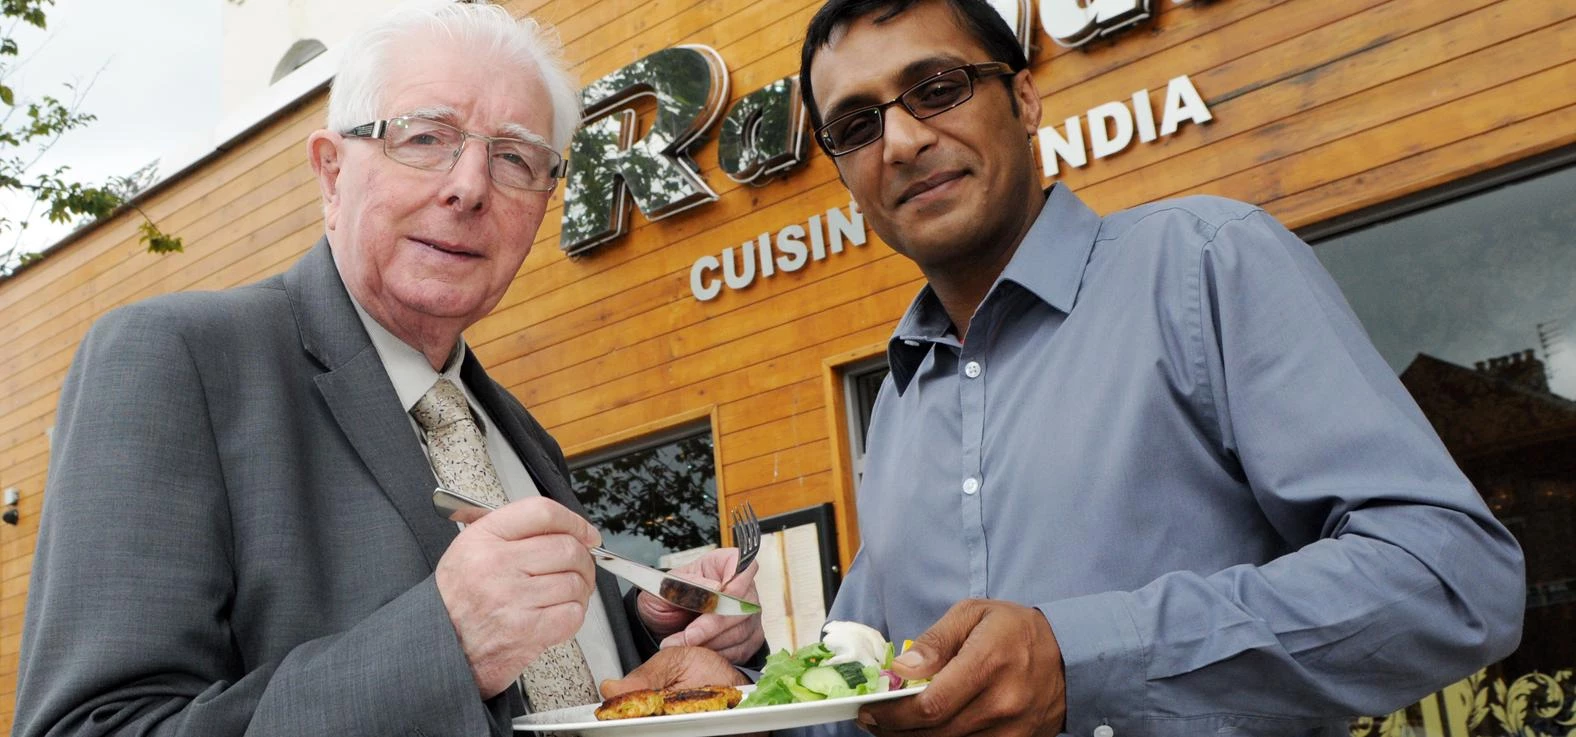 Radhuni owner Kowsar Choudhury shows some of the food to Councillor Kerr